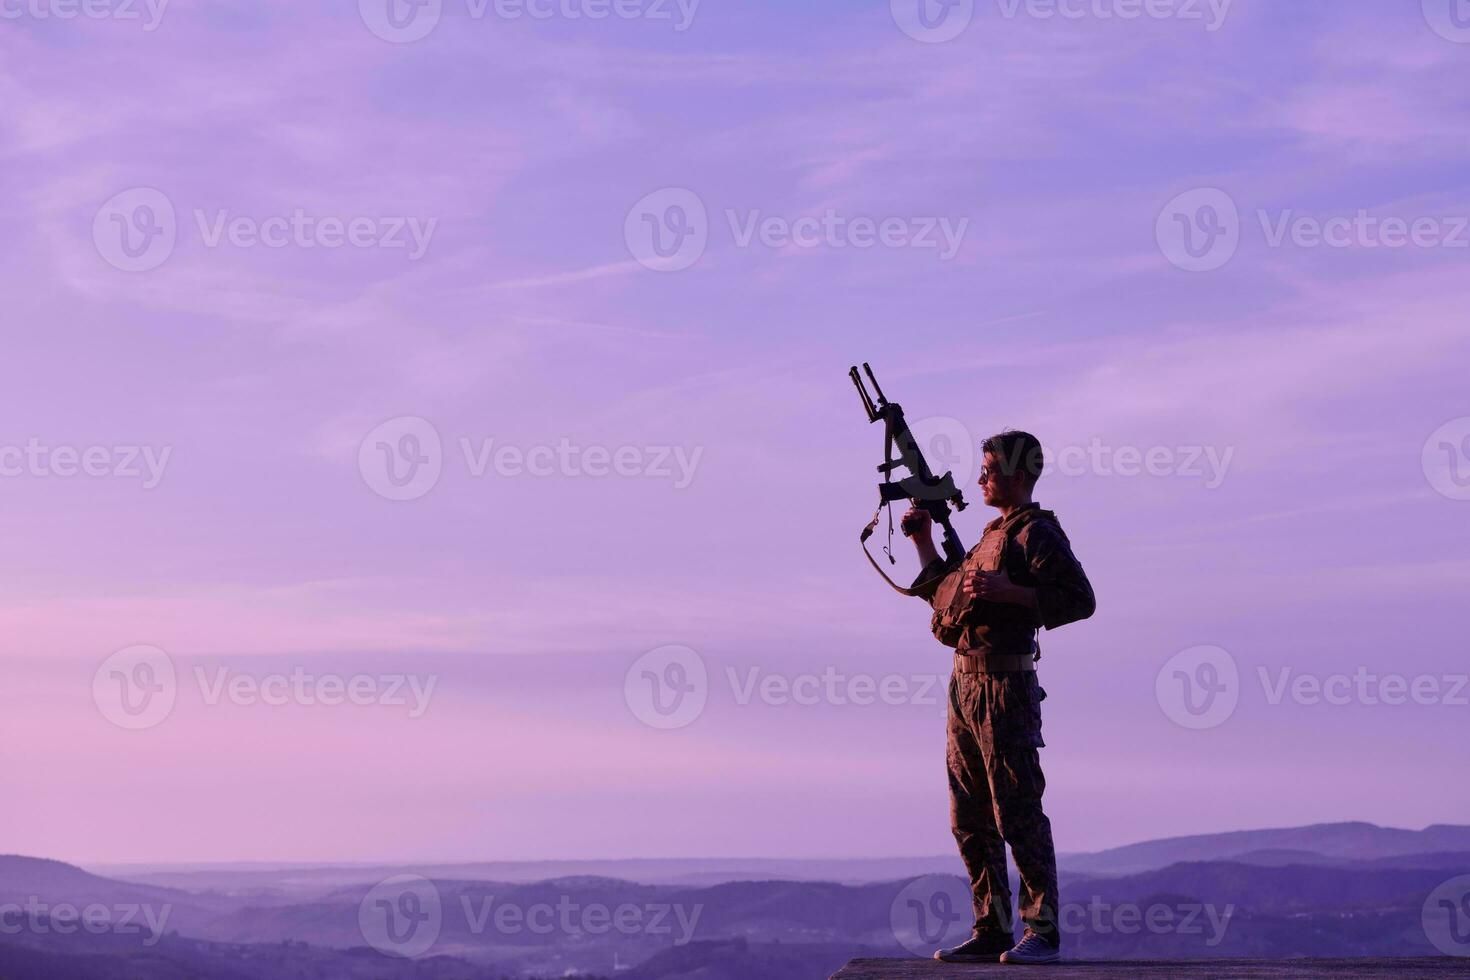 Soldier in a mission photo